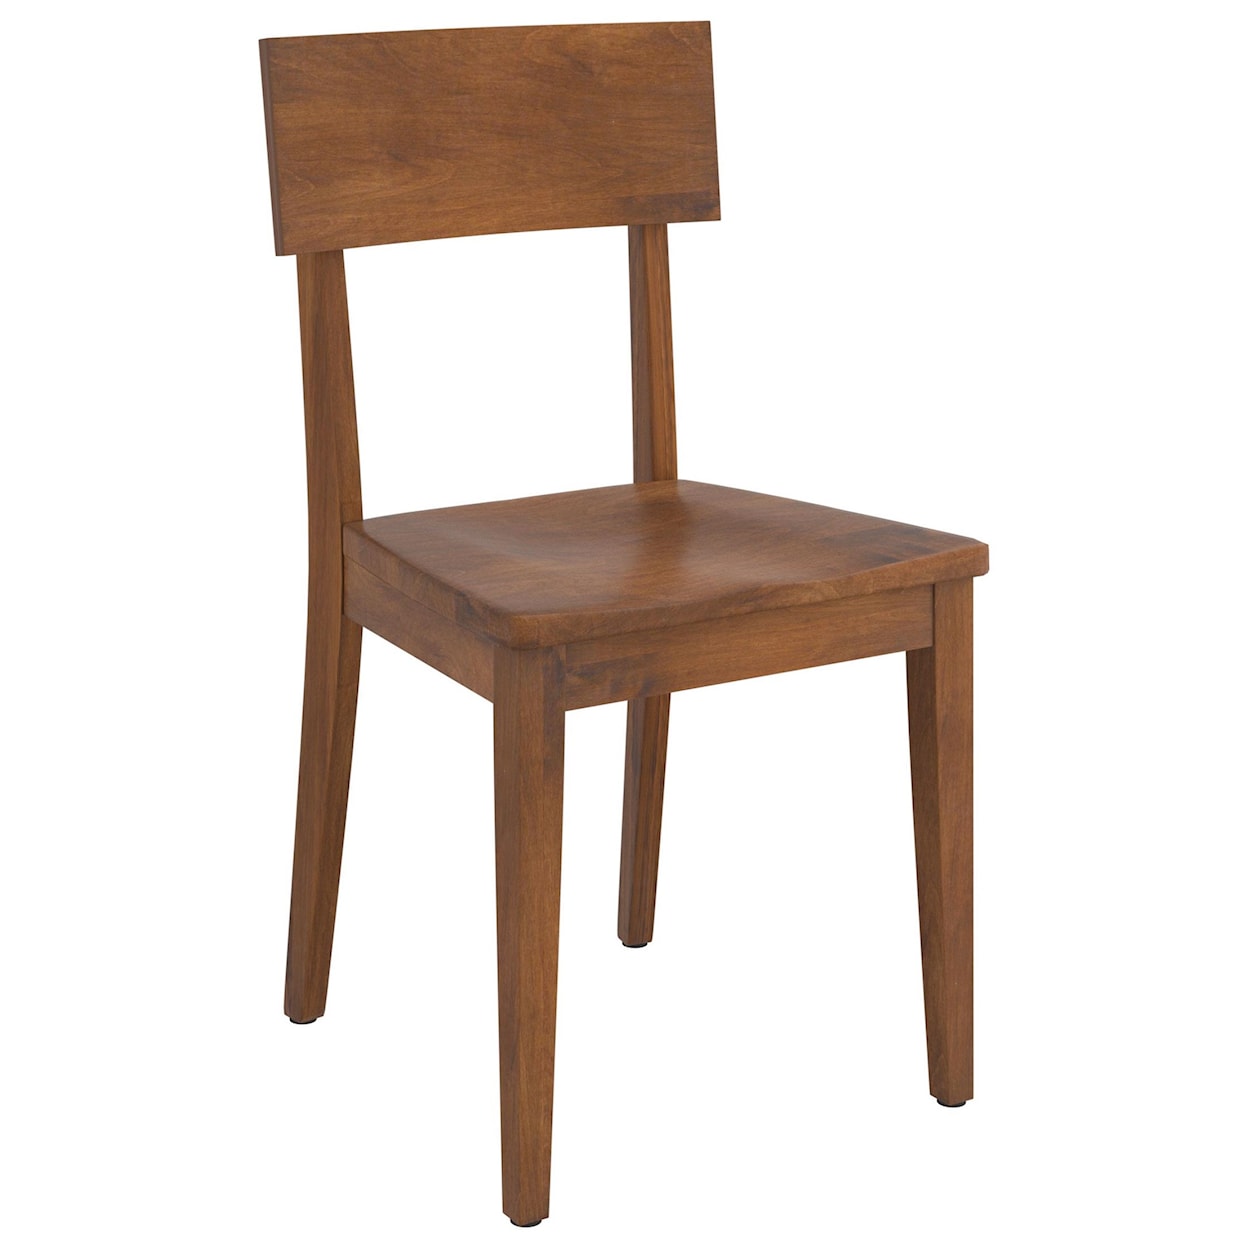 Wengerd Wood Products Fern Side Chair